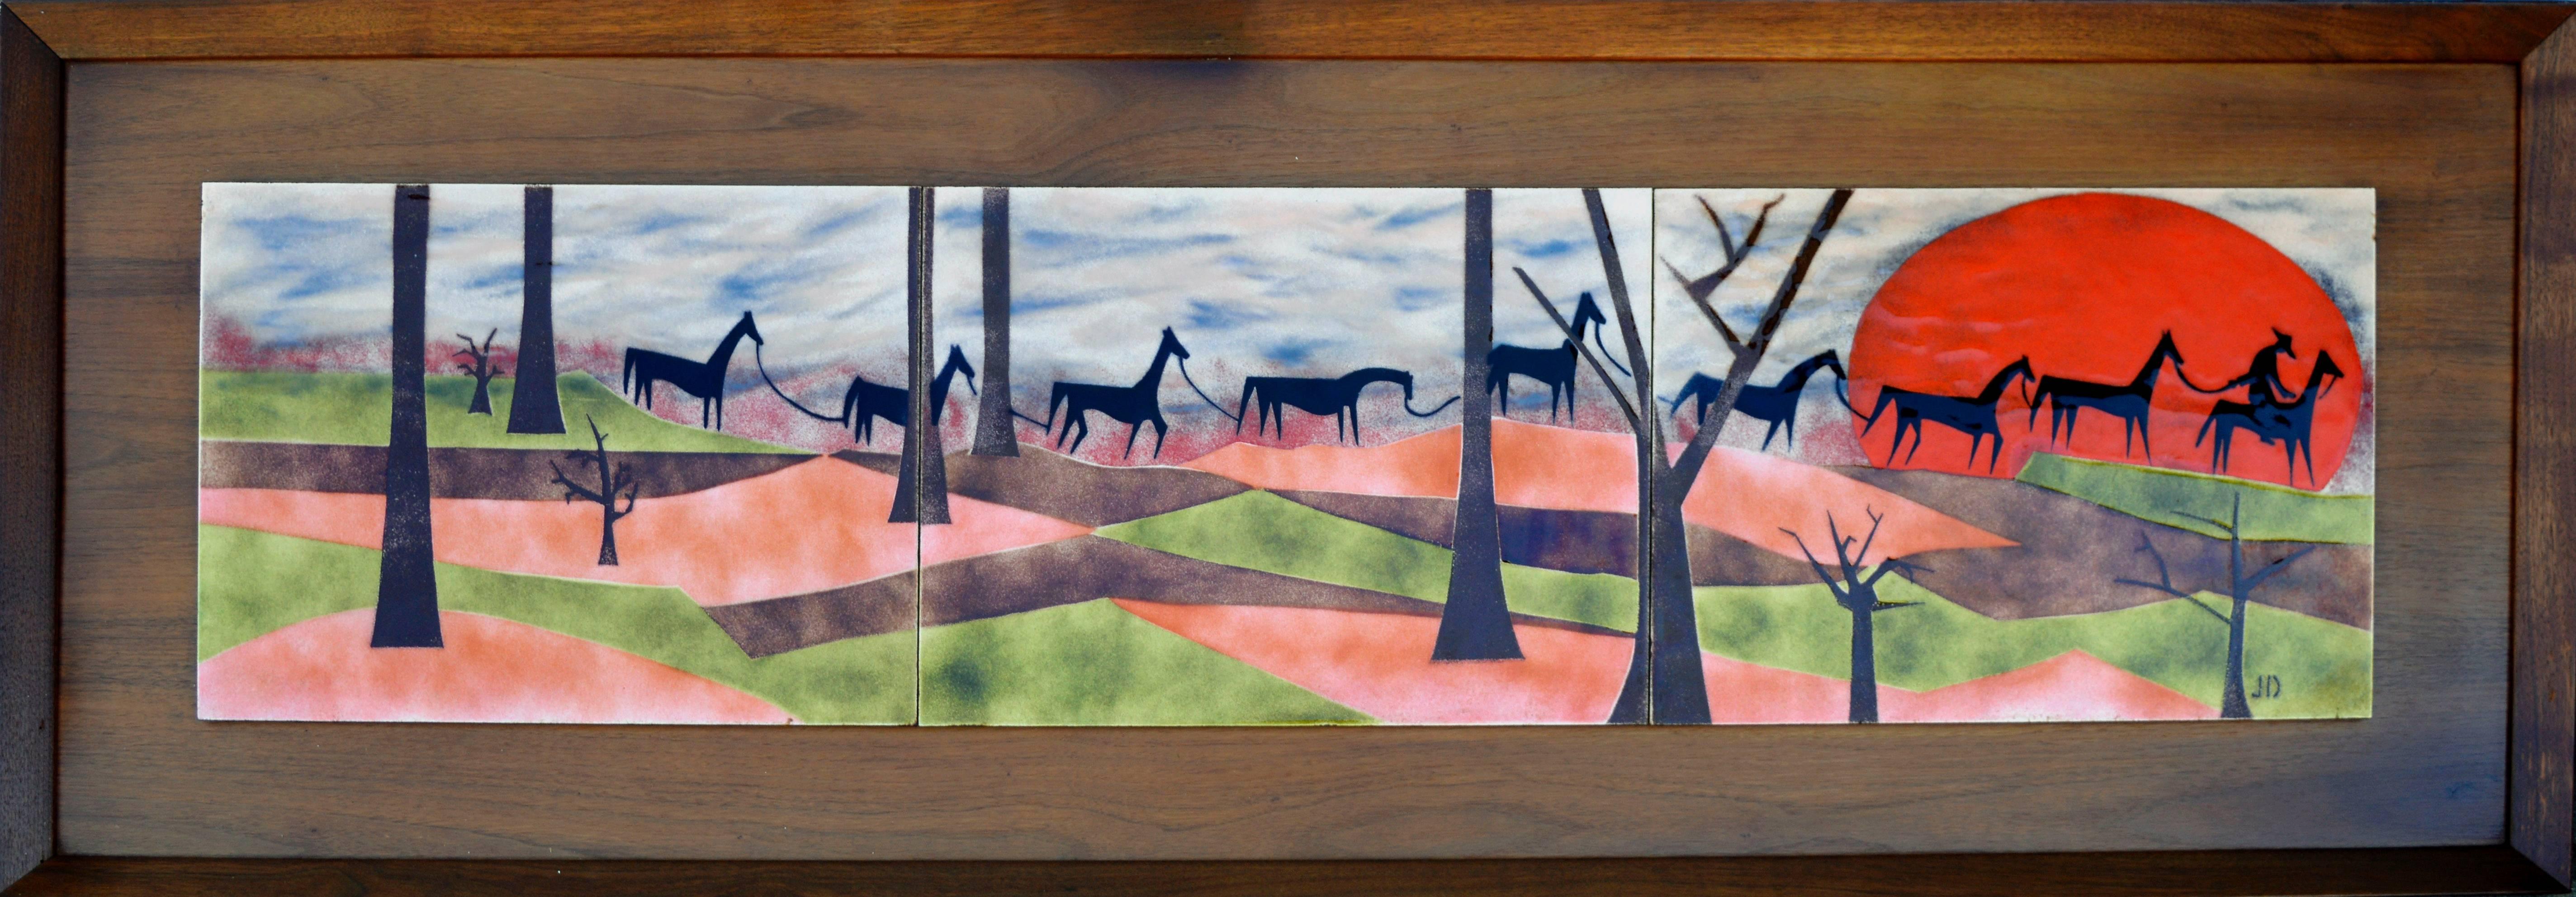 Horses on the Trail - Mixed Media Art by Judith Daner